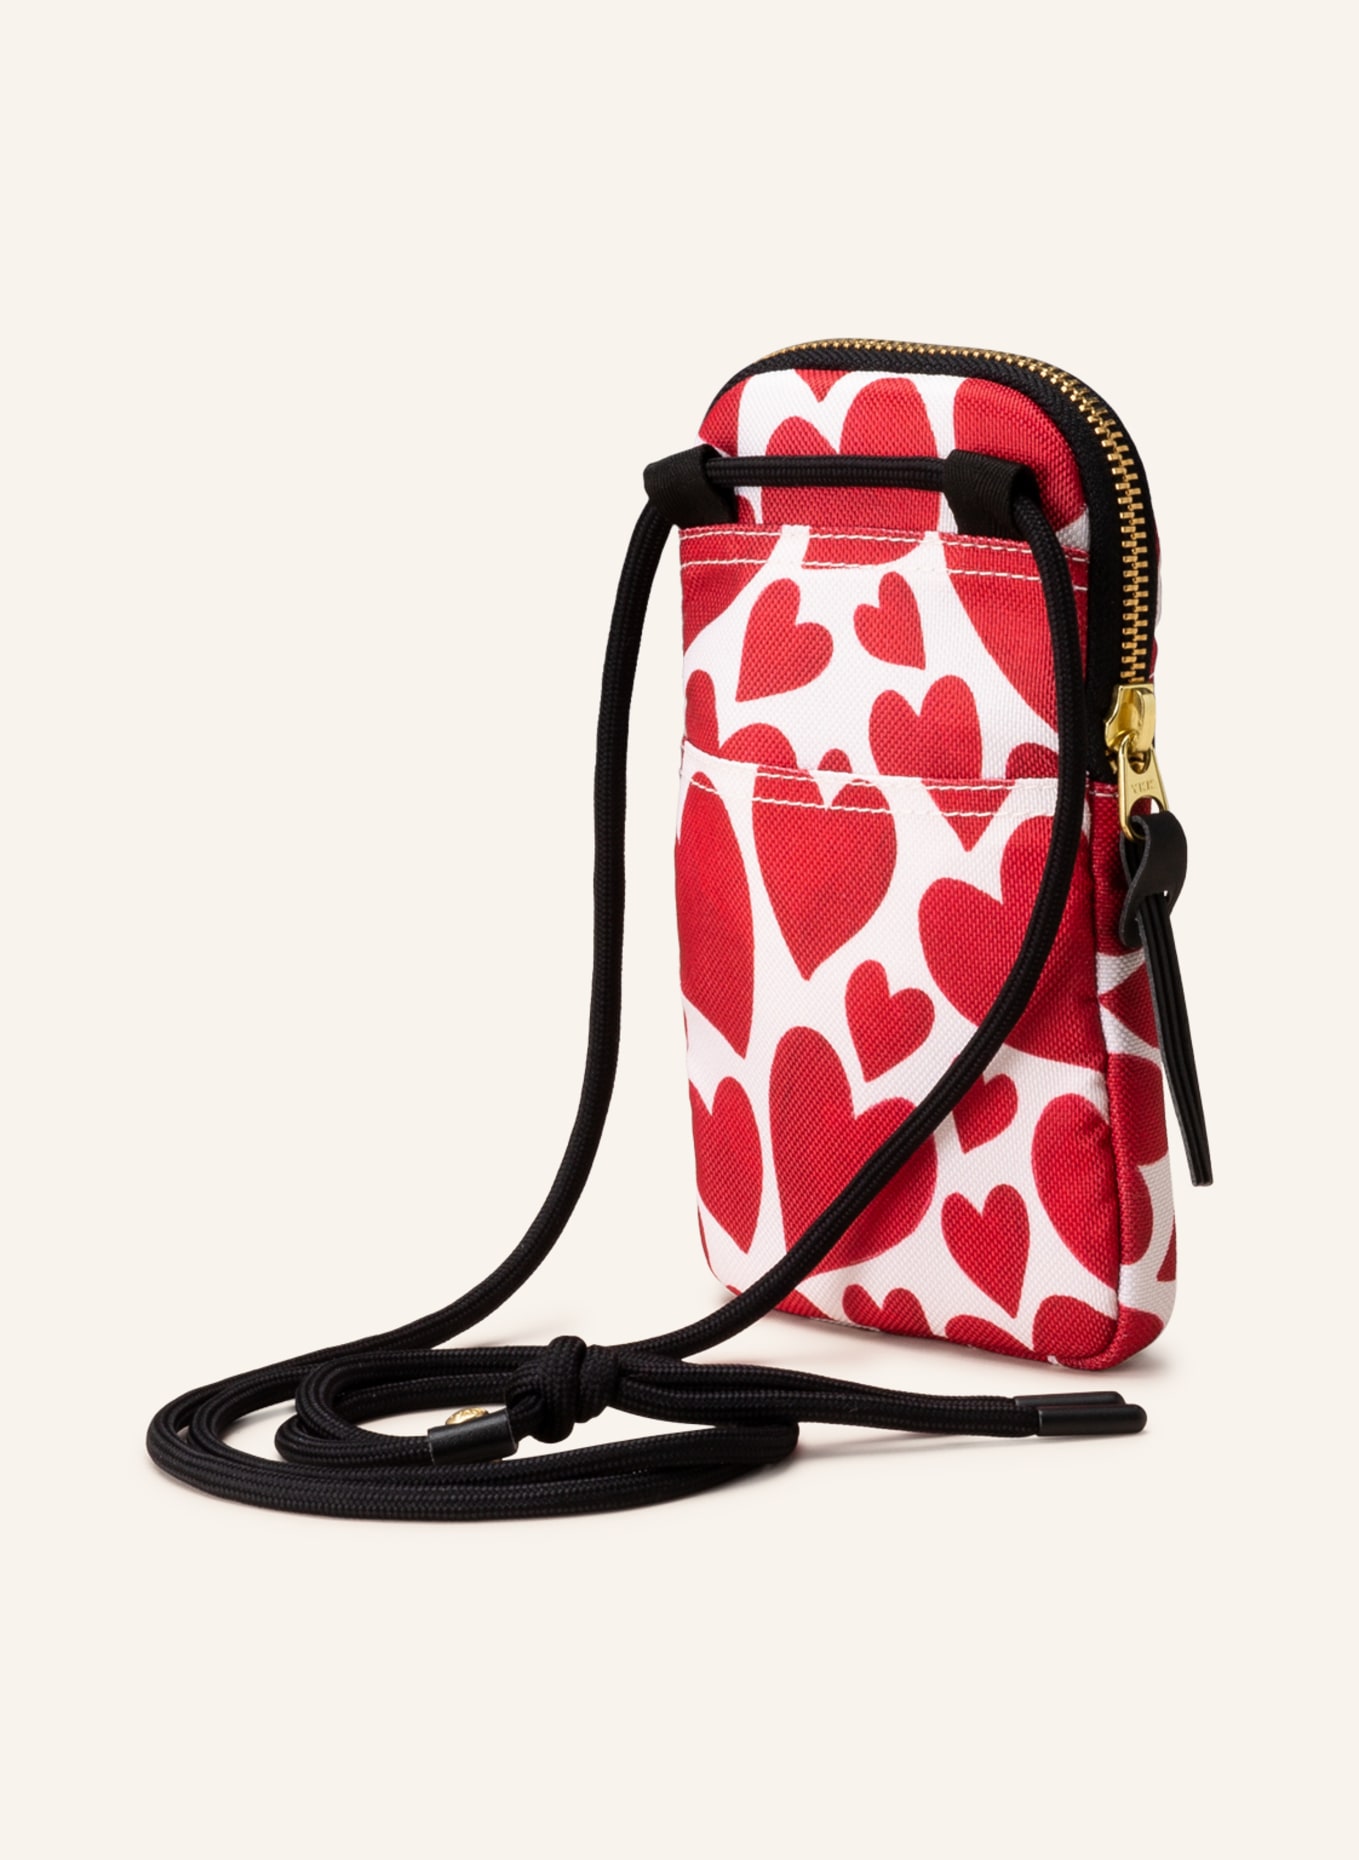 WOUF Smartphone-Tasche AMOUR, Farbe: WEISS/ ROT (Bild 2)